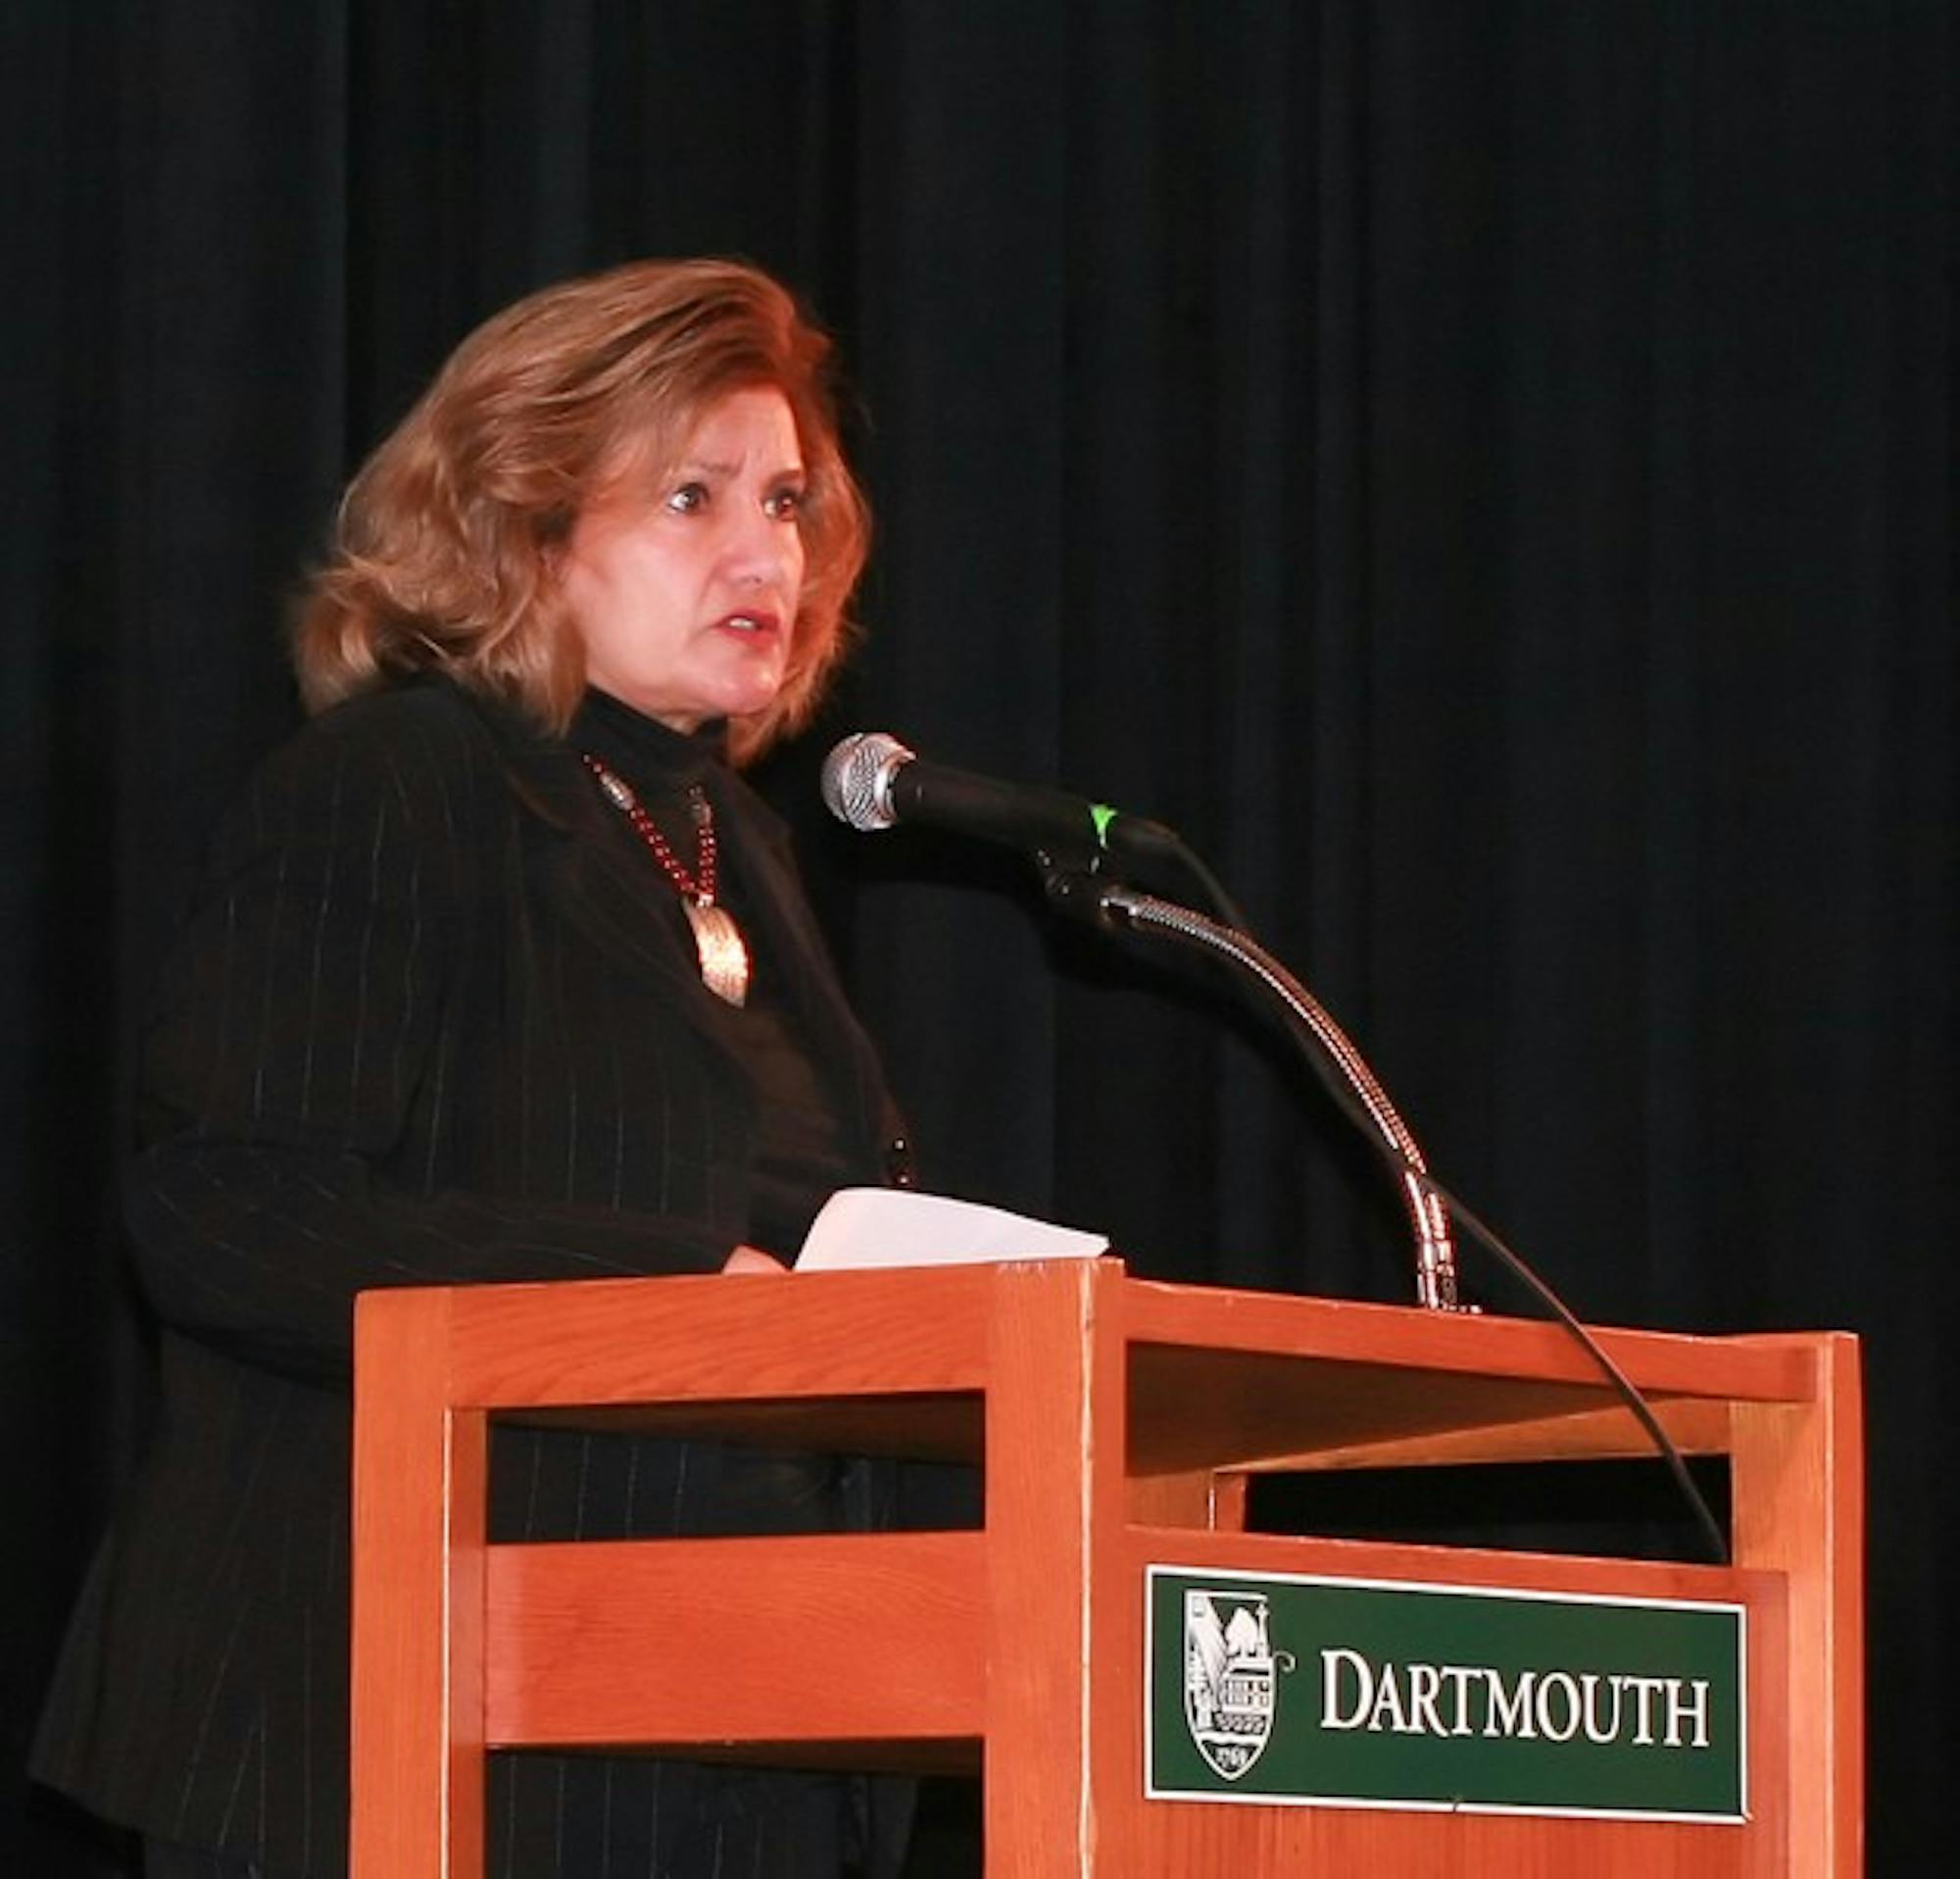 Nonie Darwish, a former Muslim and Christian convert, discussed her critical view of radical Islam to a crowded, and at points irate, audience Wednesday evening in Collis Common Ground.